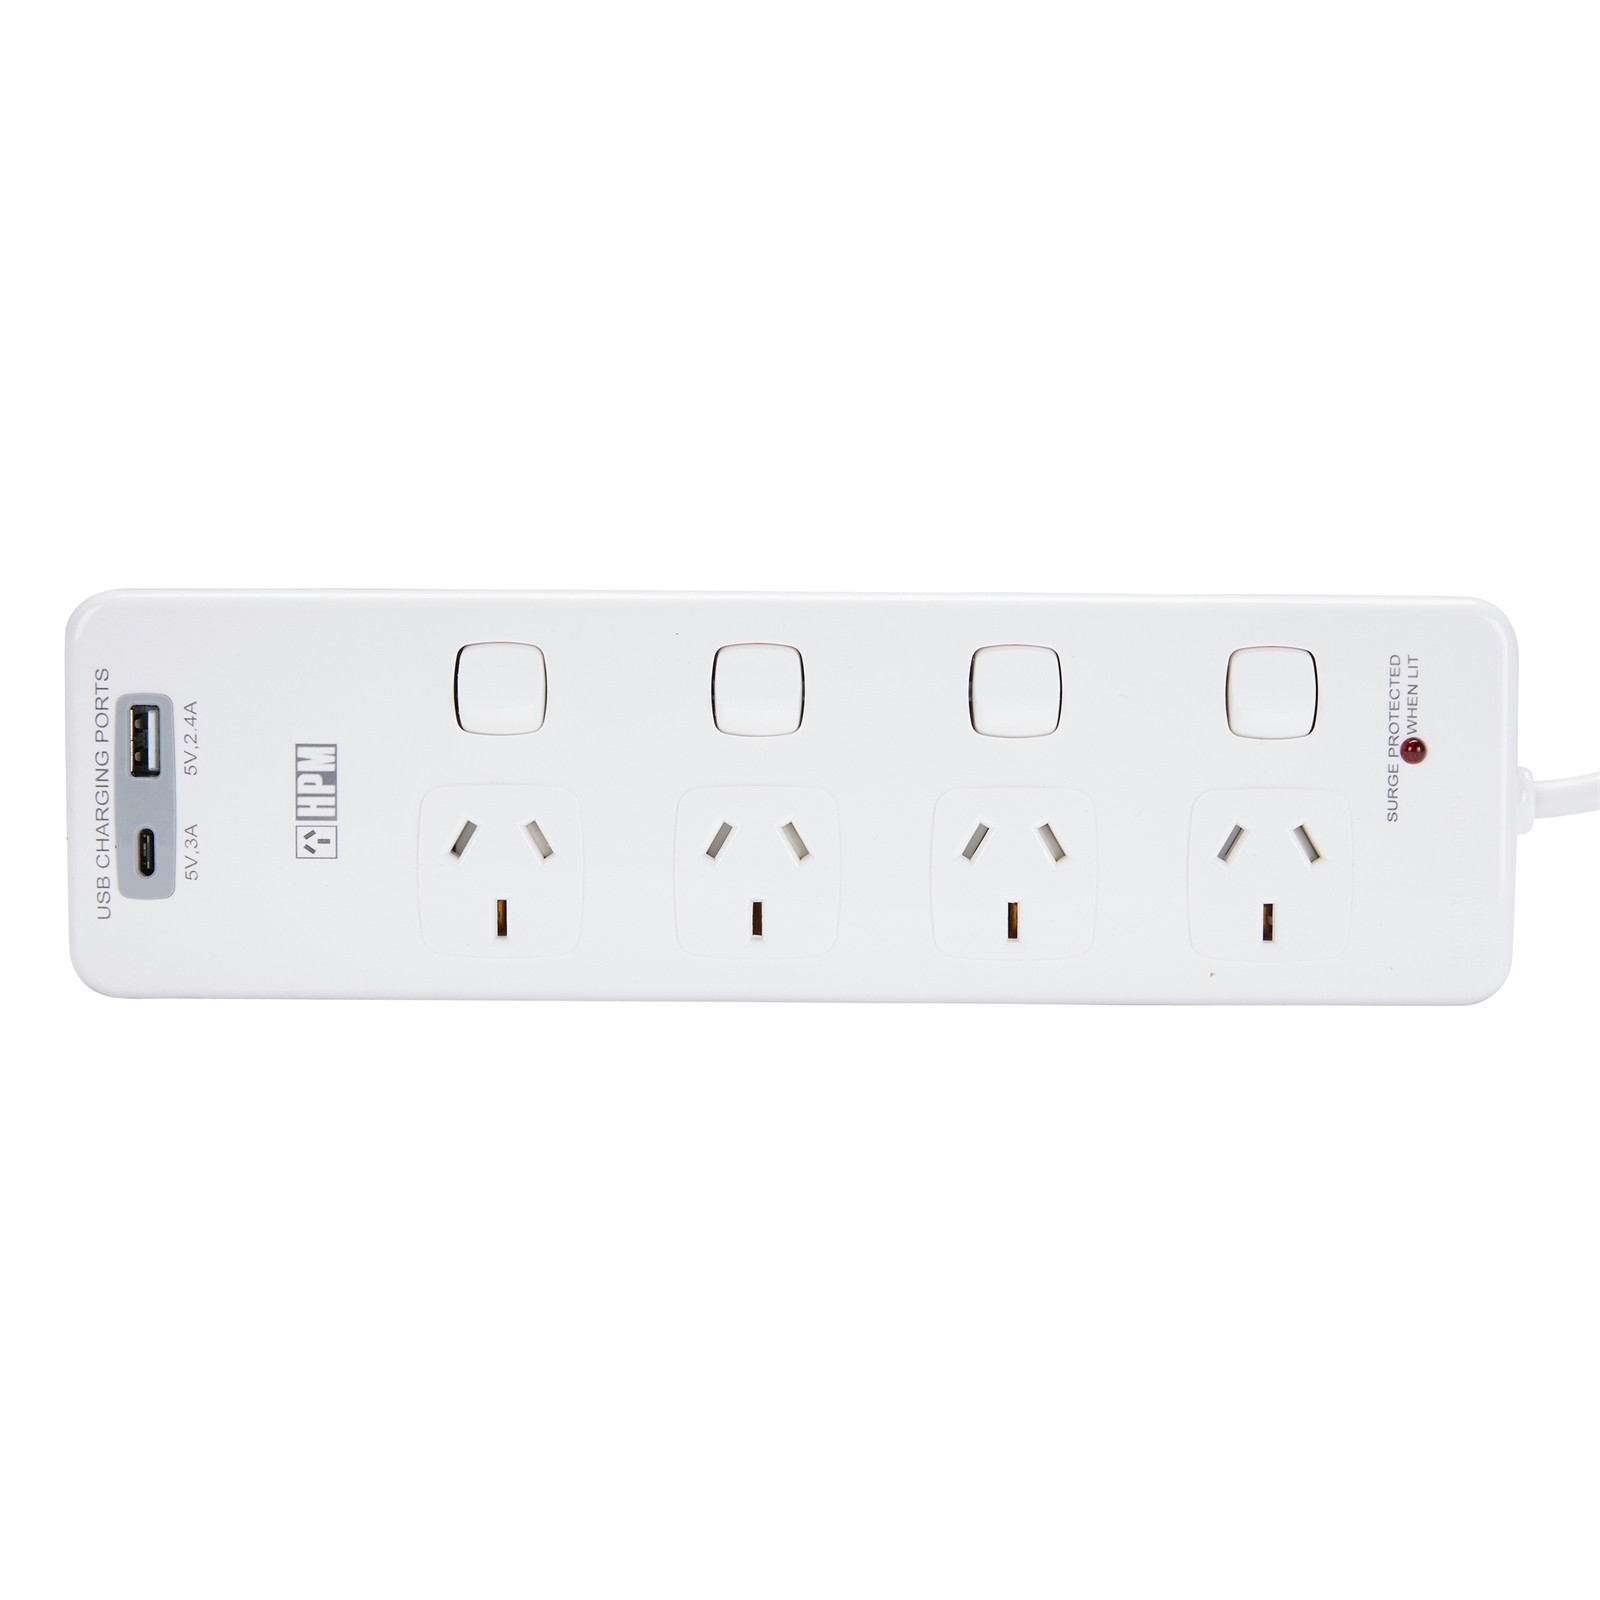 HPM 4 OUTLET SURGE PROTECTED POWERBOARD with A and C USB PORTS